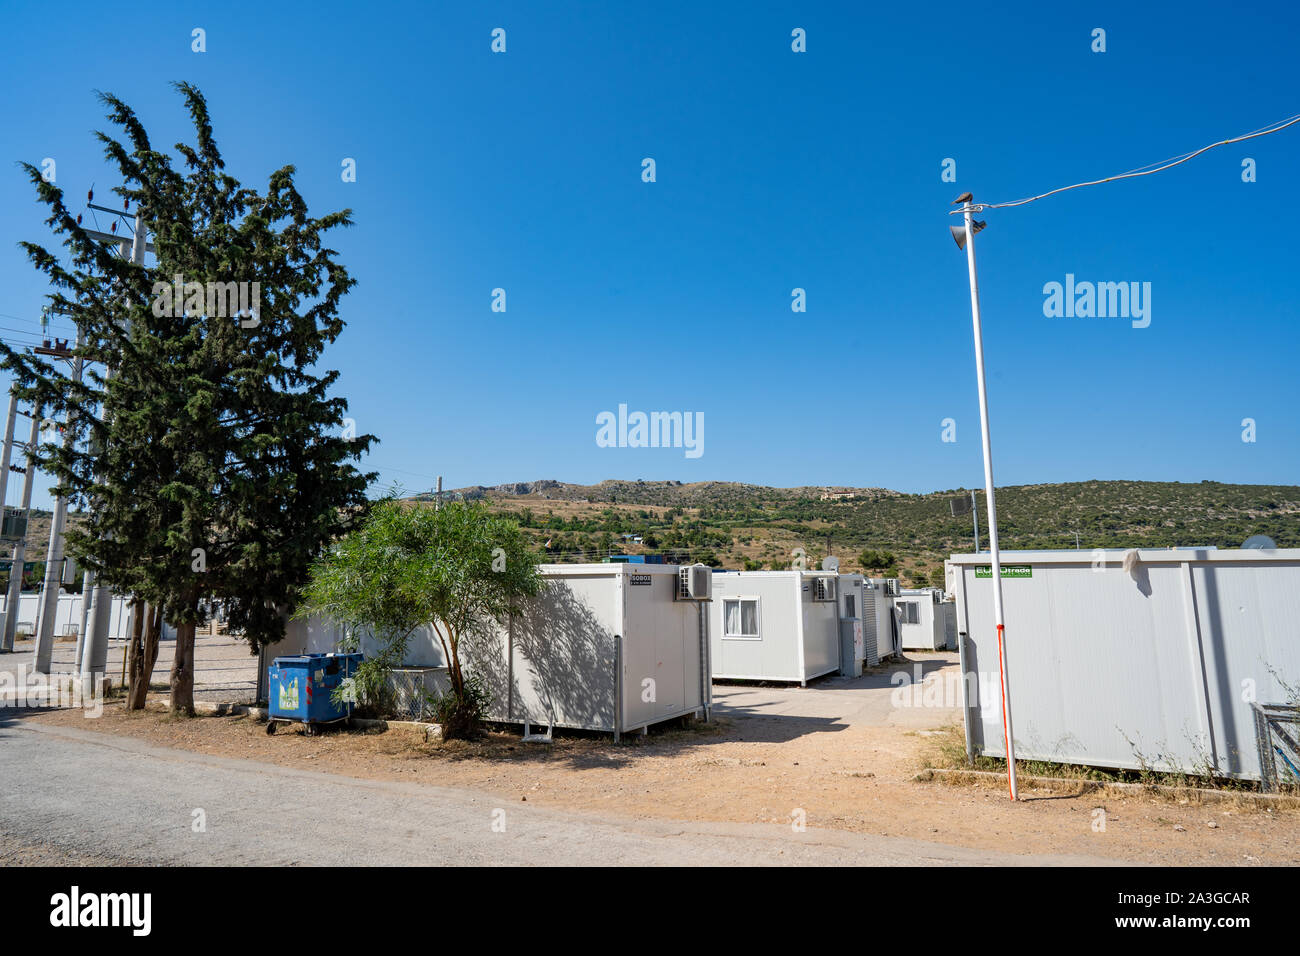 Typical isoboxes are seen in the residential area of Camp Sxistou.  Each isobox is currently home to around 4 people.    In 2018, there were almost 66,969 official applications for asylum according to the statistical data published by the Asylum service.  The UNHCR cites 15,670 as the number of refugees who have arrived in 2019. Stock Photo